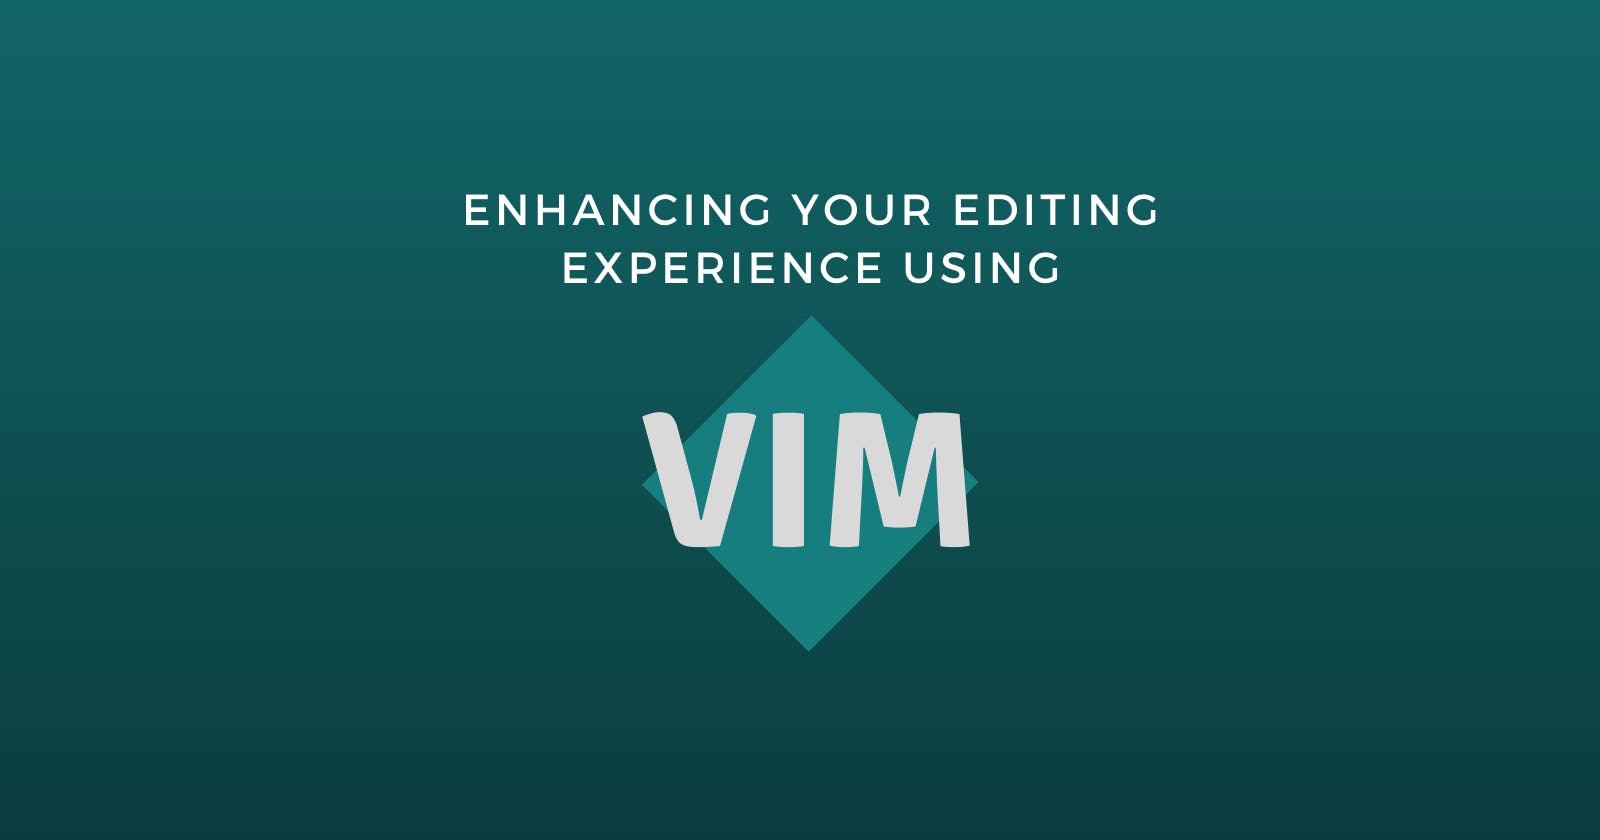 Vim - Nifty commands to enhance your editing experience